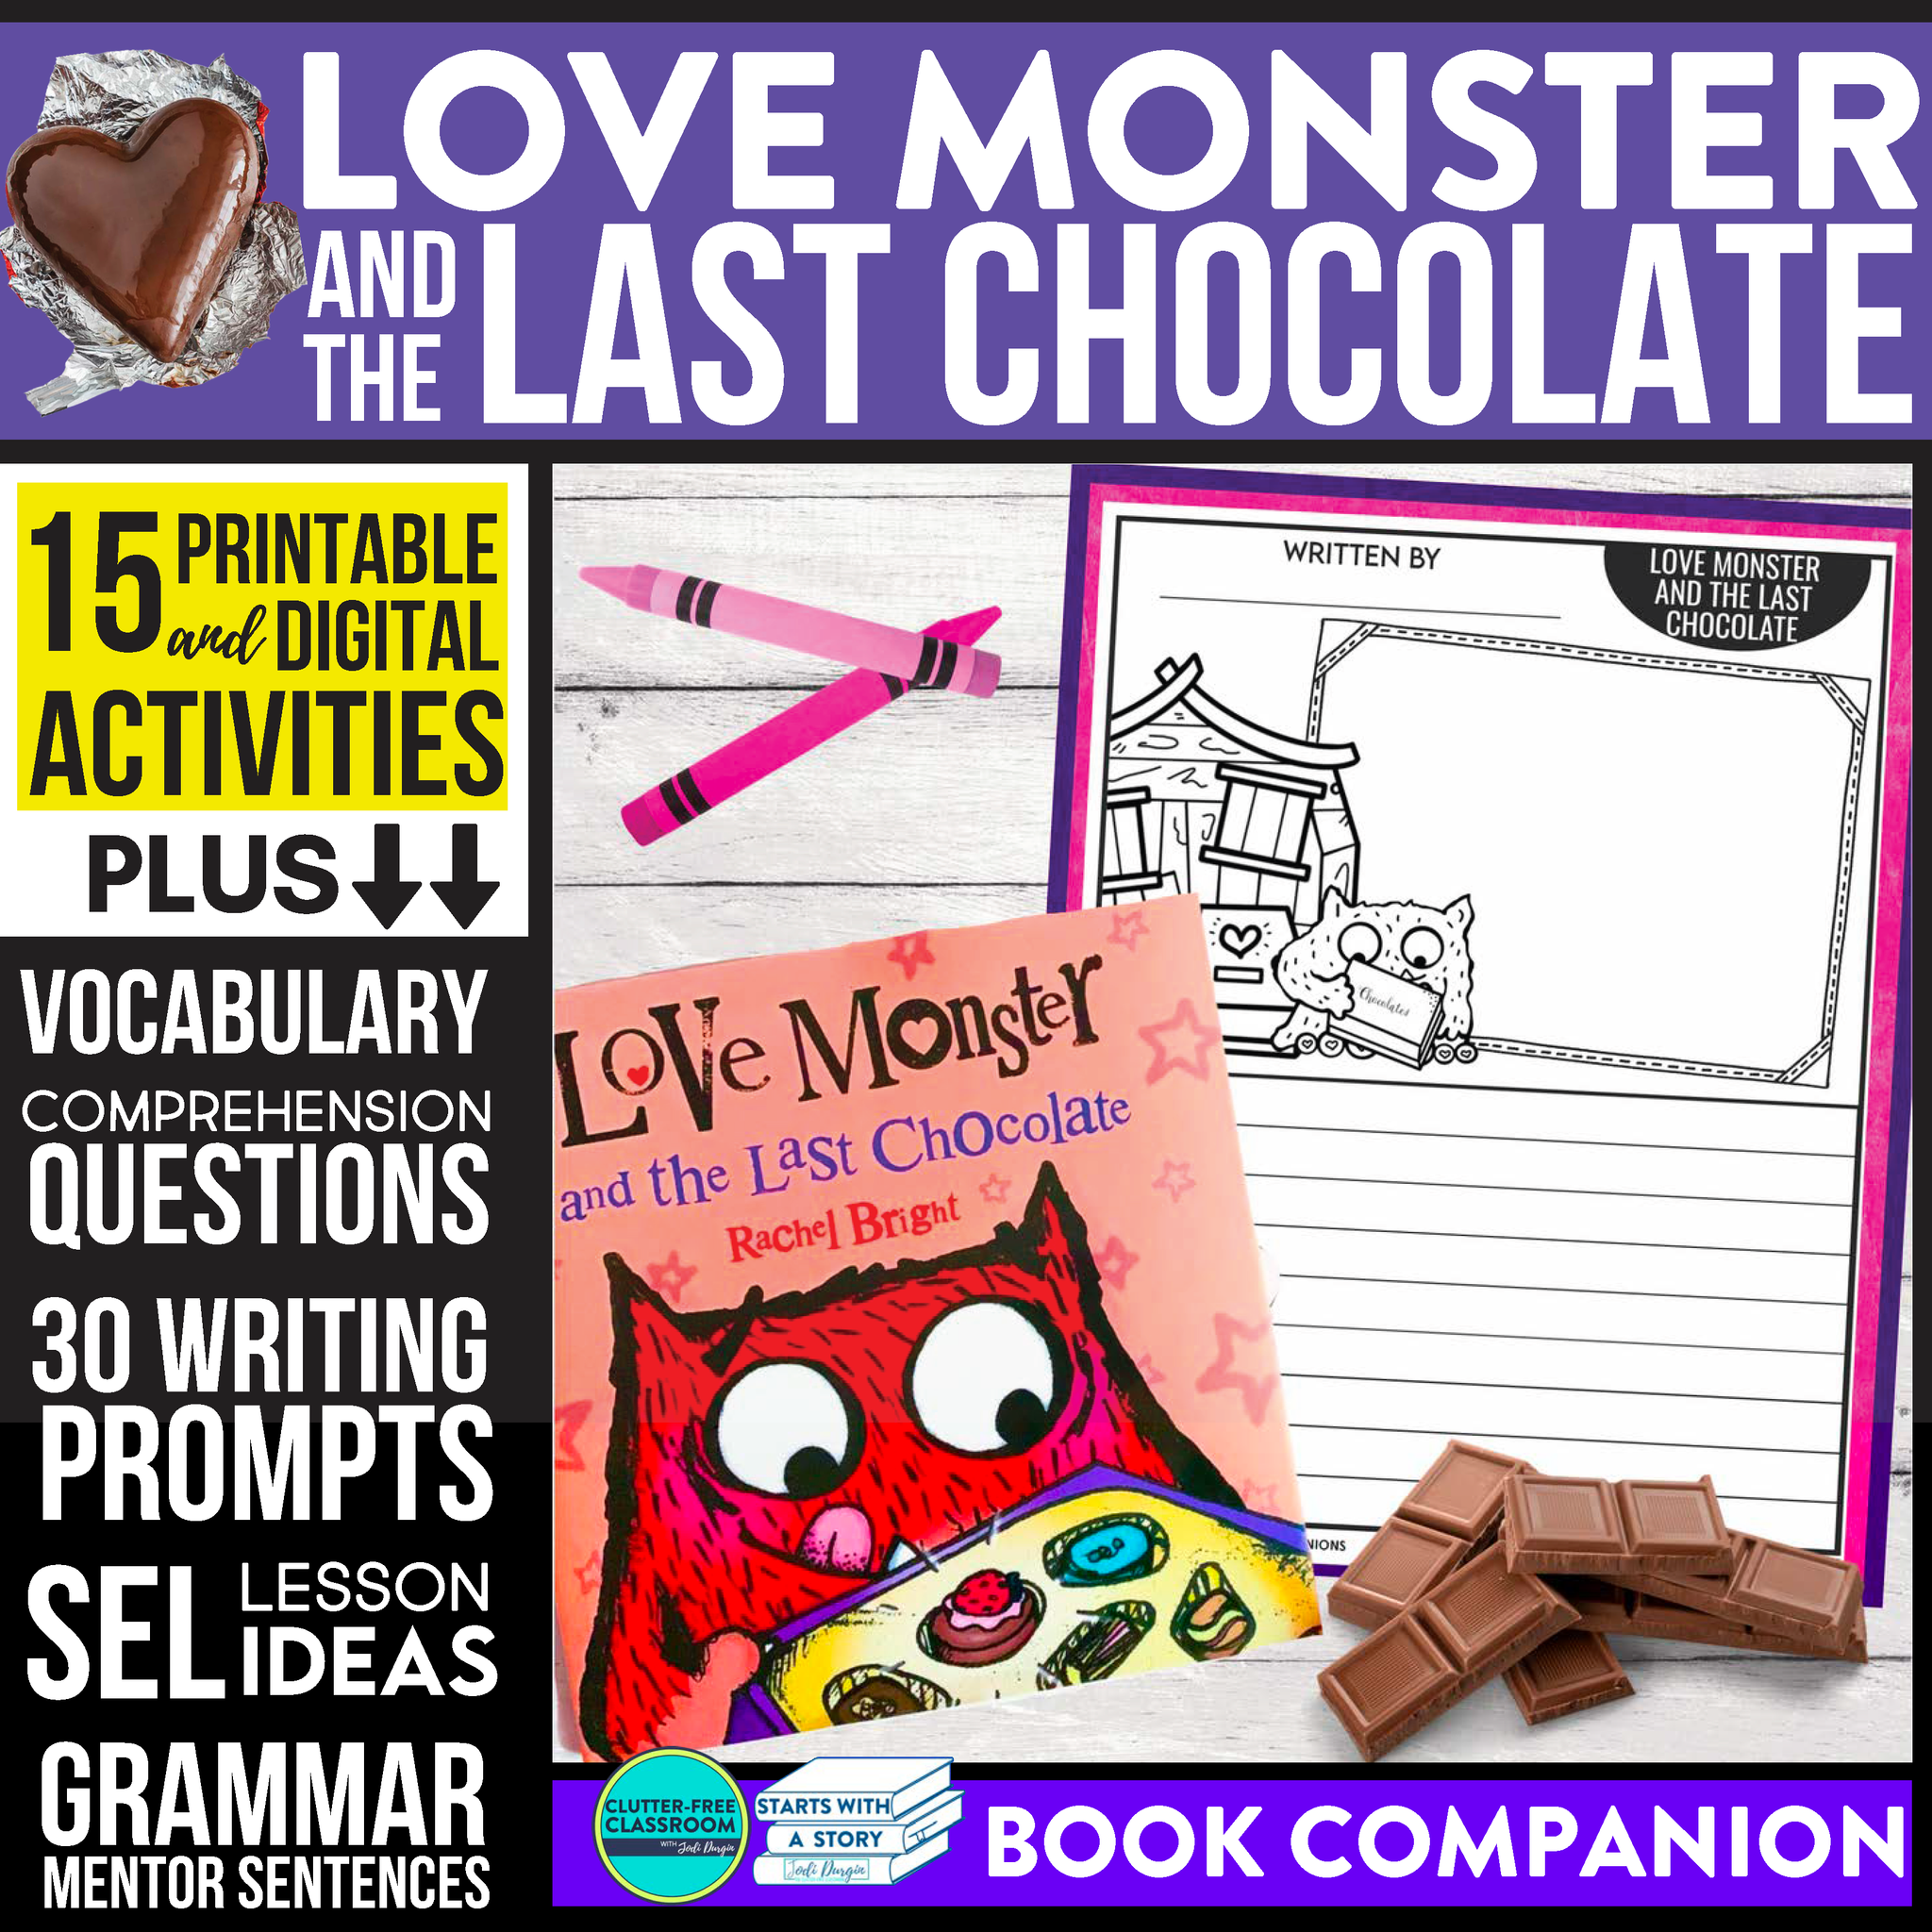 LOVE MONSTER AND THE LAST CHOCOLATE activities and lesson plan ideas